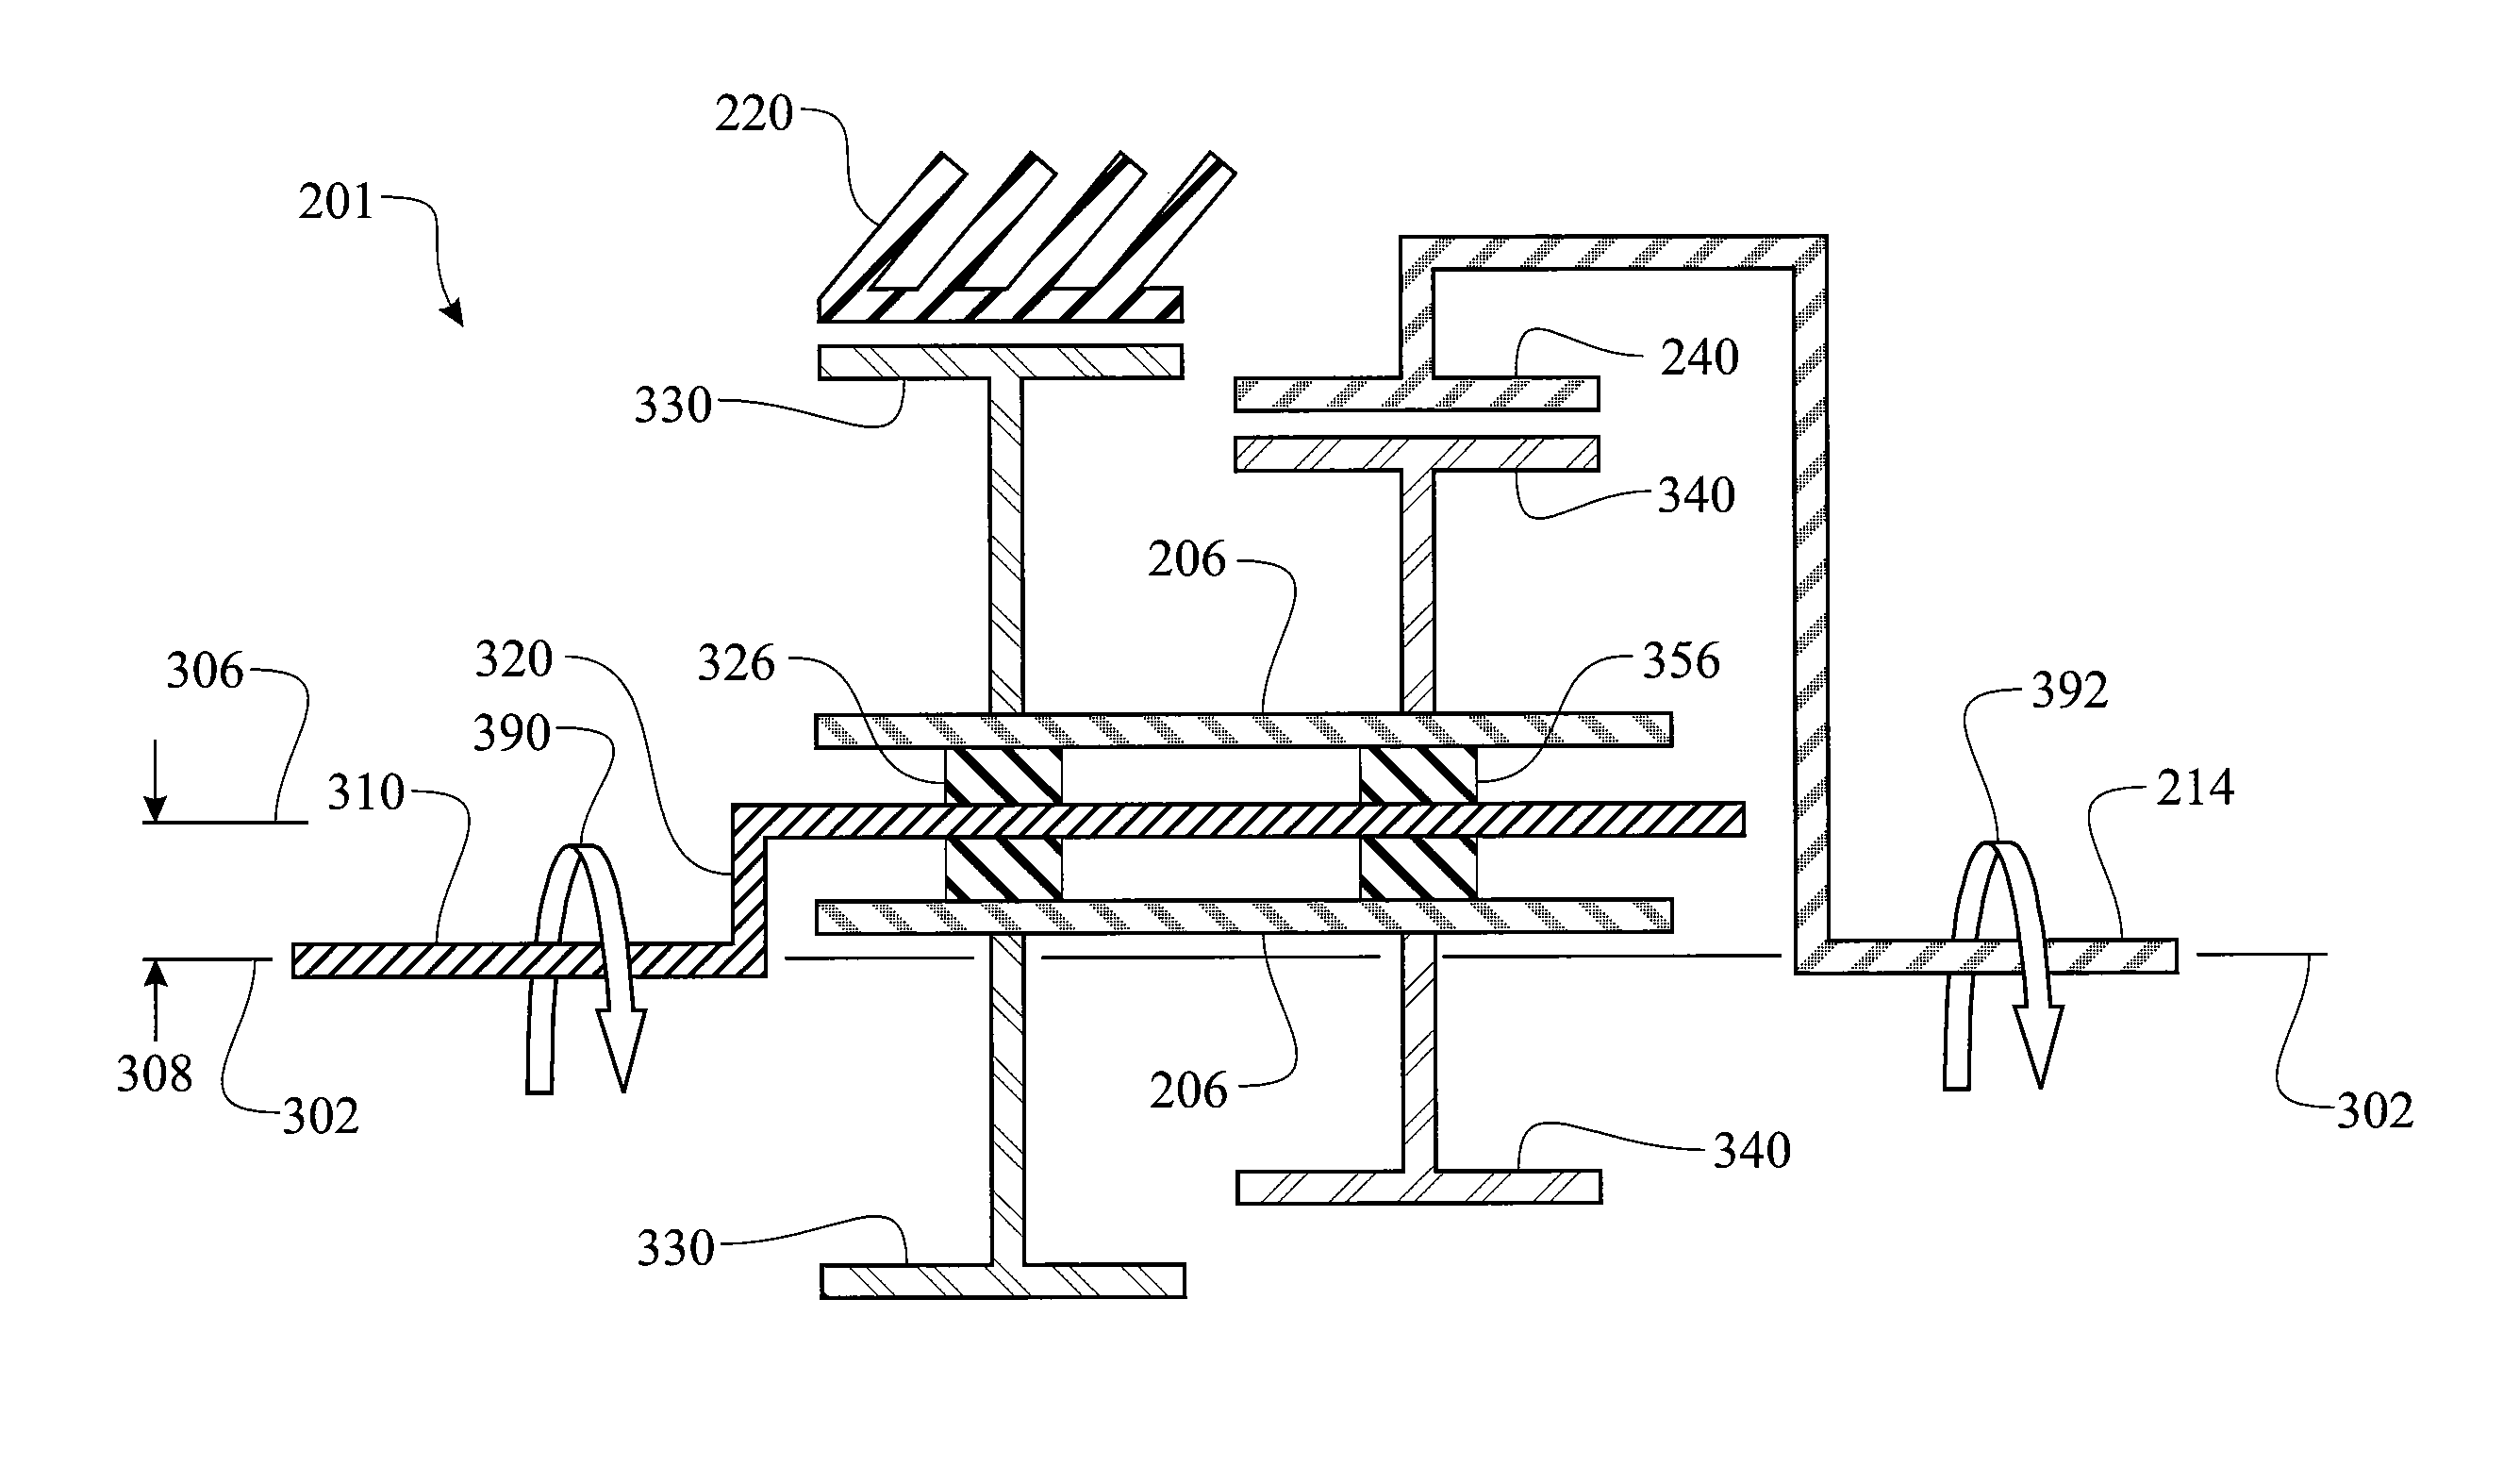 Coaxially arranged reduction gear assembly